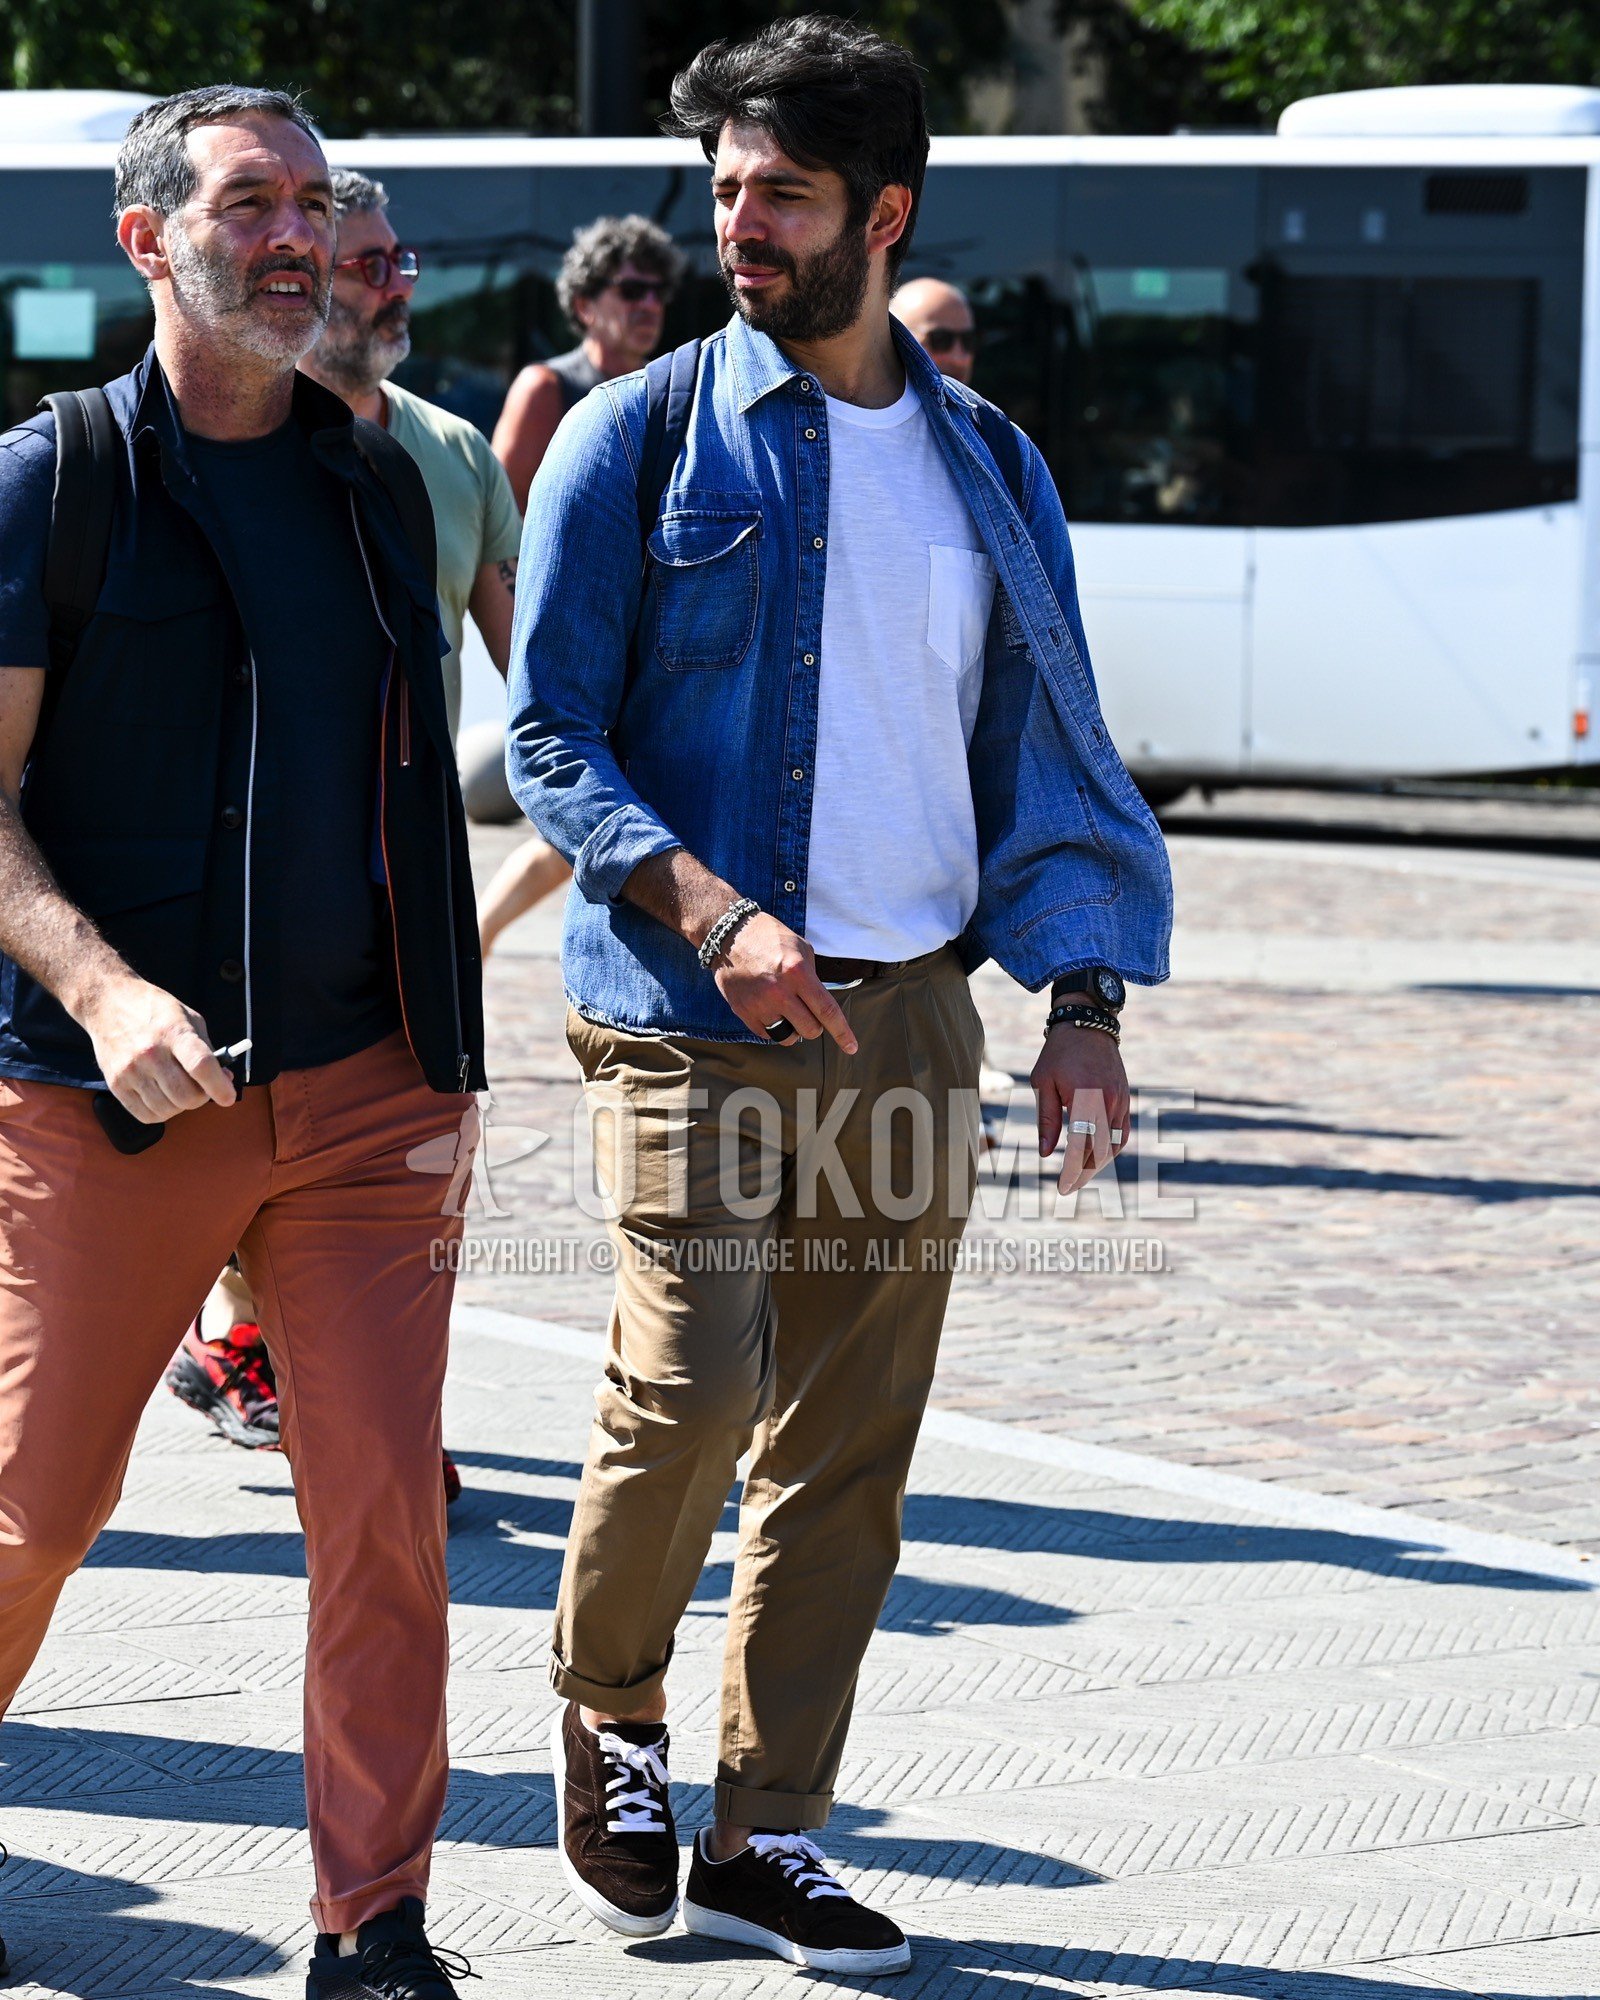 Men's spring summer autumn outfit with blue plain denim shirt/chambray shirt, white plain t-shirt, brown plain leather belt, brown plain chinos, brown low-cut sneakers, navy plain backpack.